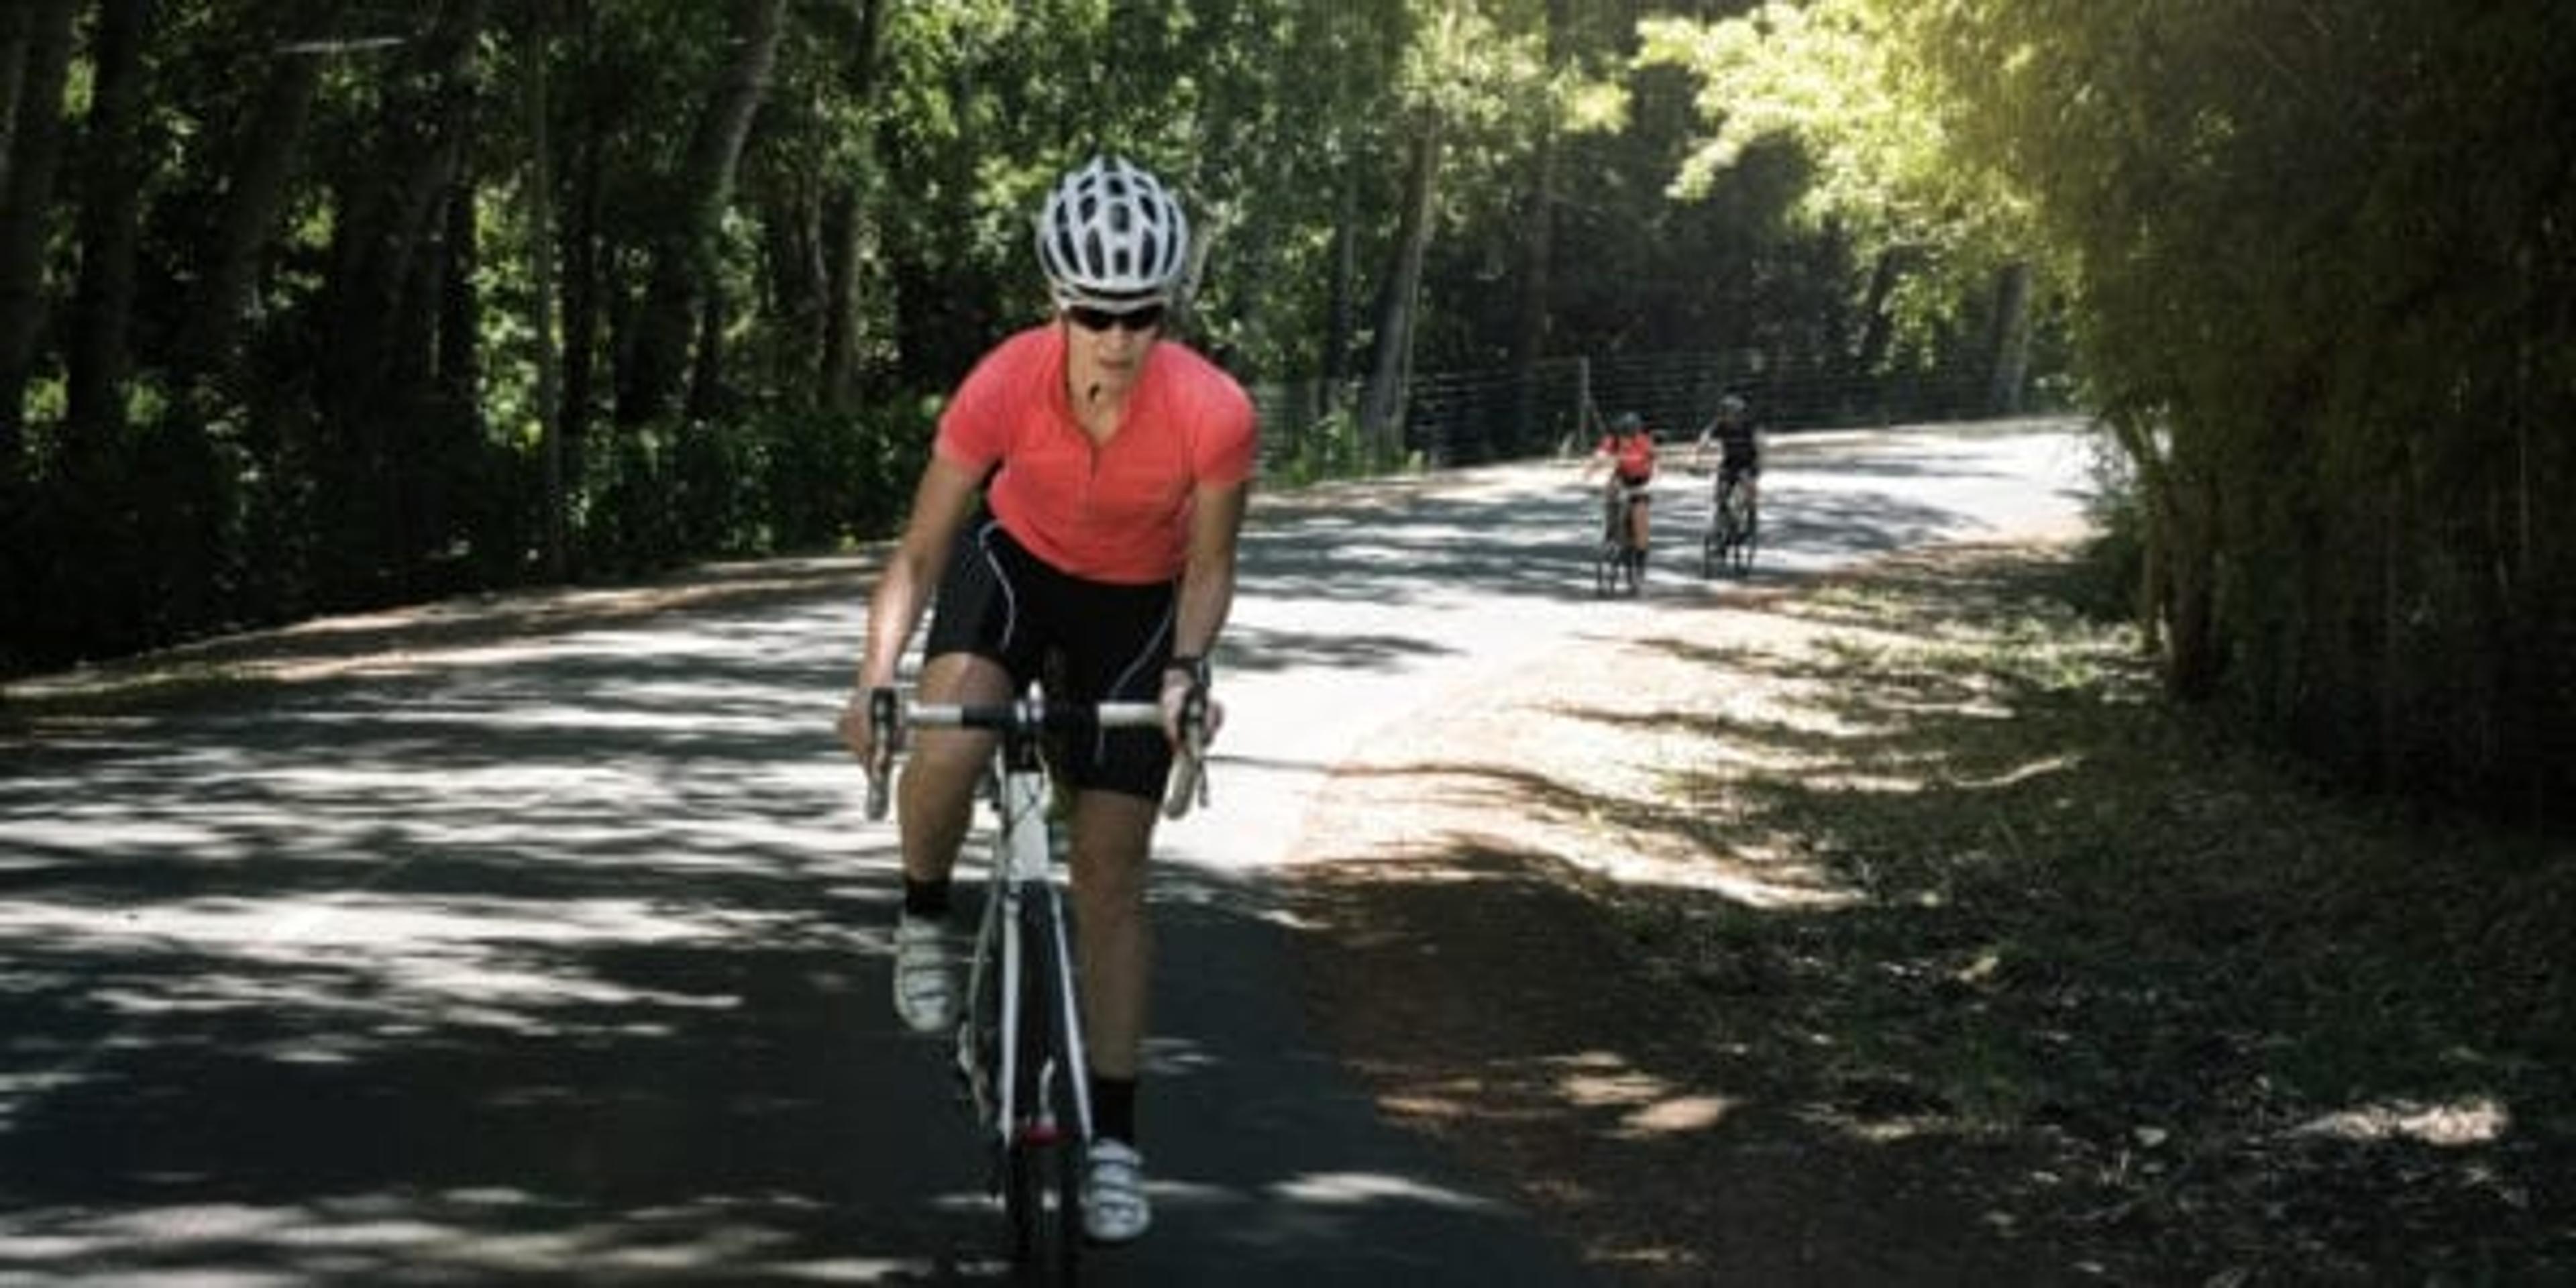 Female cyclist wearing neon colors riding on a bike path